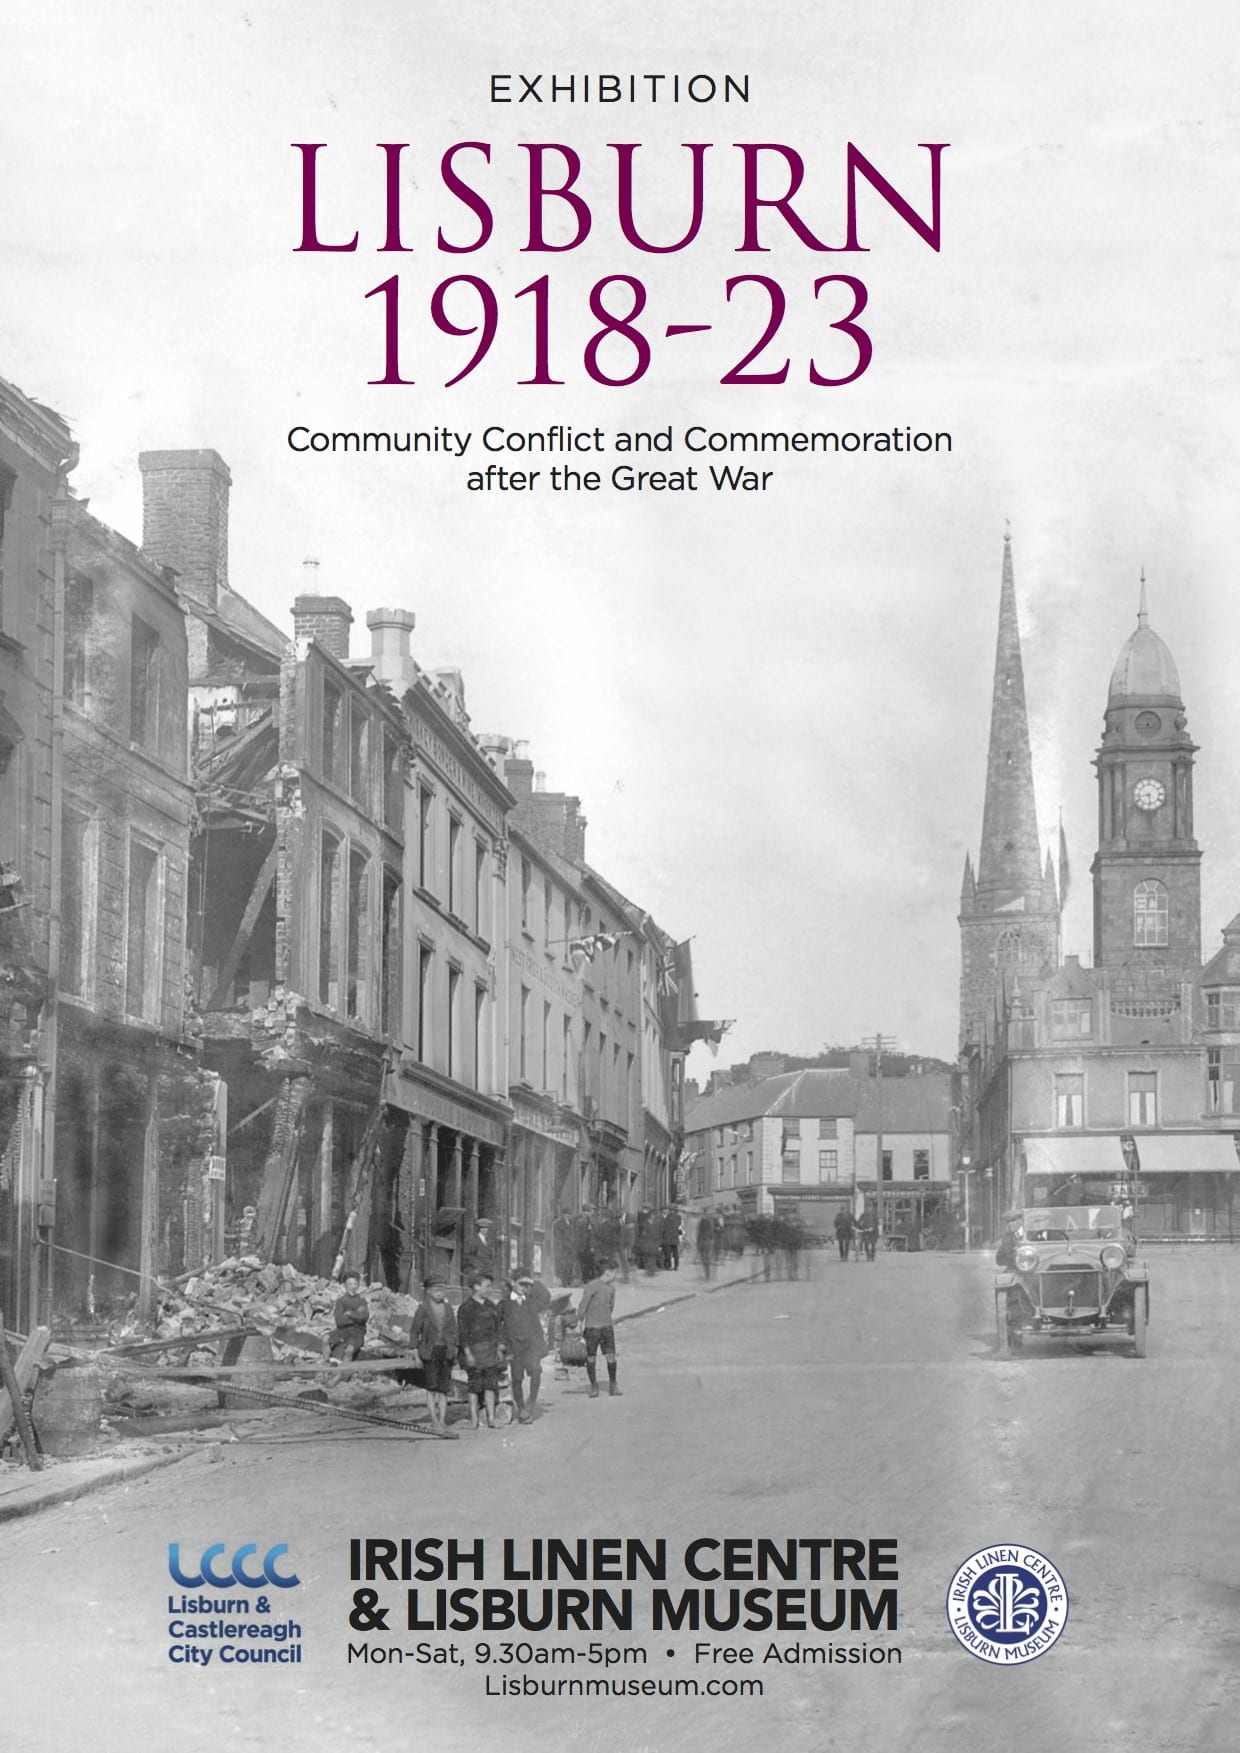 Lisburn-1918-23-Community-Conflict-and-Commemoration-after-the-Great-War-exhibition-irish-linen-centre-lisburn-museum